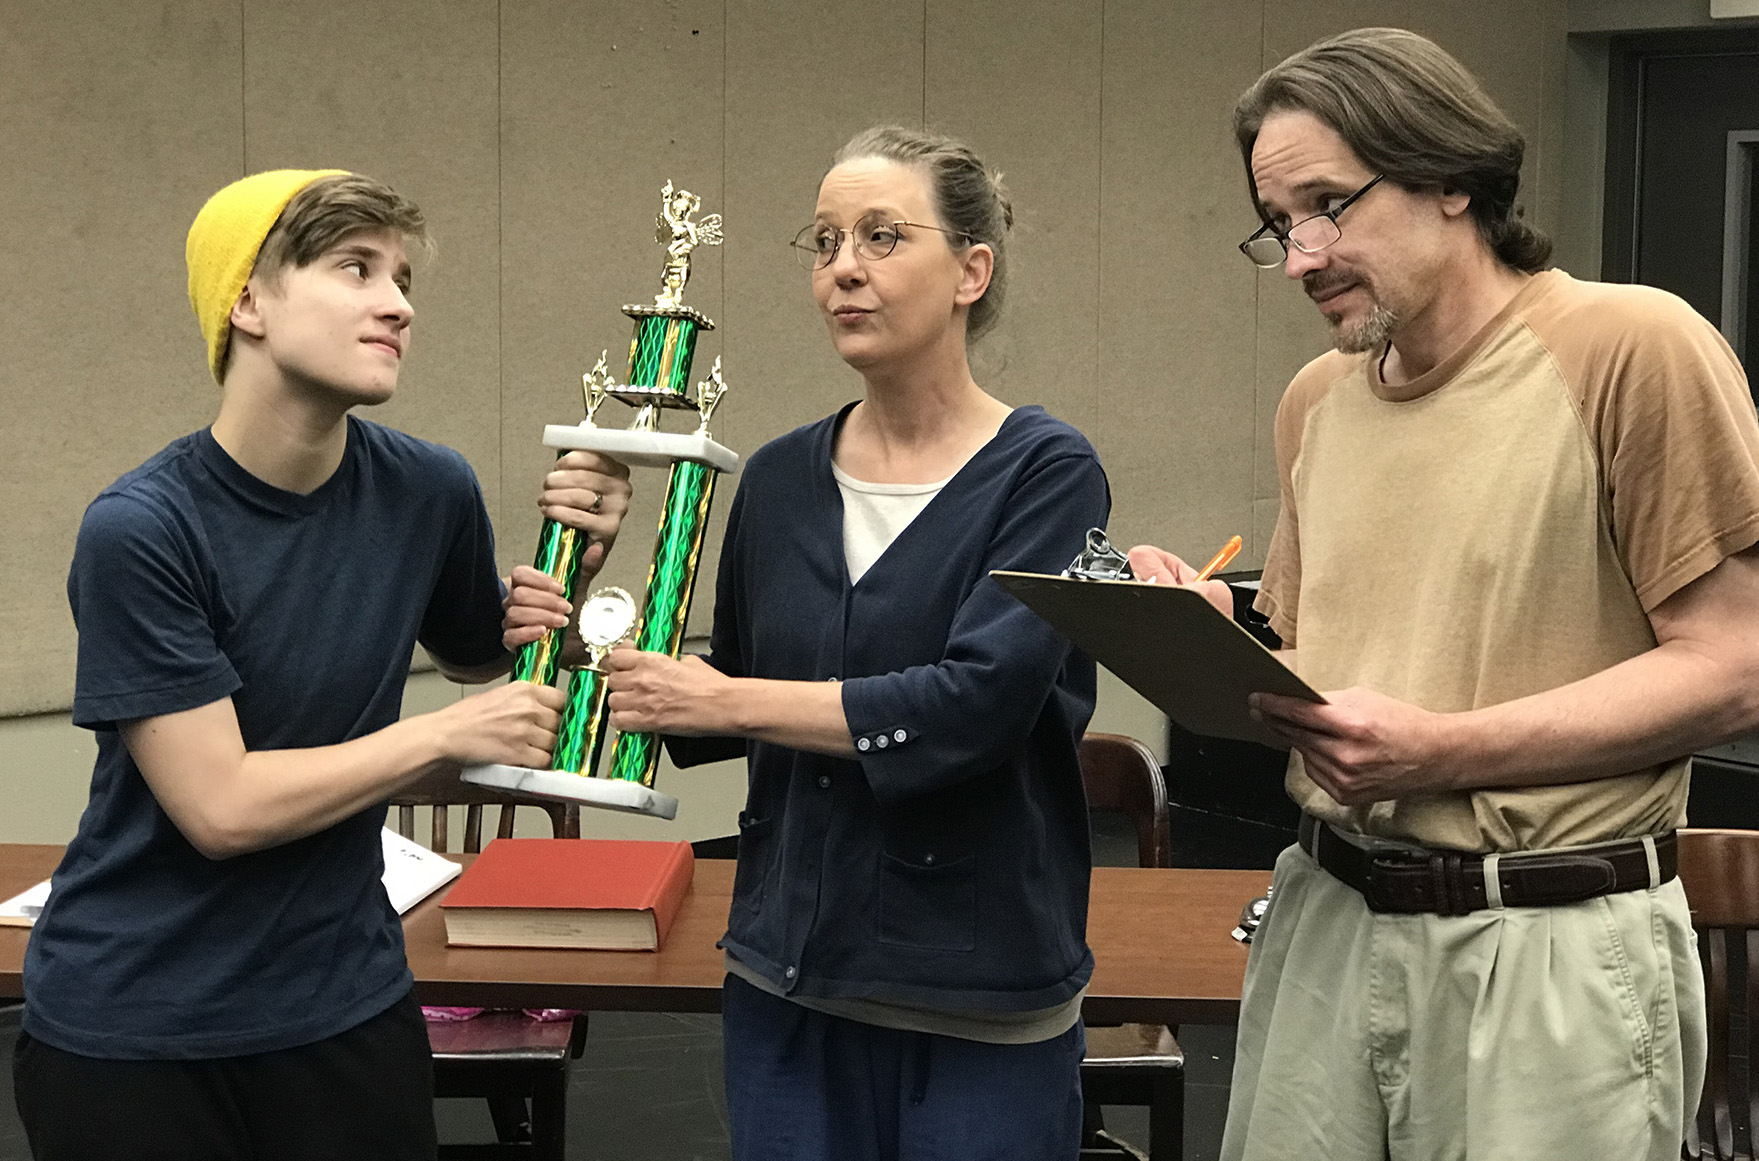 Jason, Roz and Jamie Couch rehearse a scene from "The 25th Annual Putnam County Spelling Bee," a feature of this year's SummerStage Festival at SFA. The festival runs June 27 through July 12 and also features the children's show "The Reluctant Dragon."